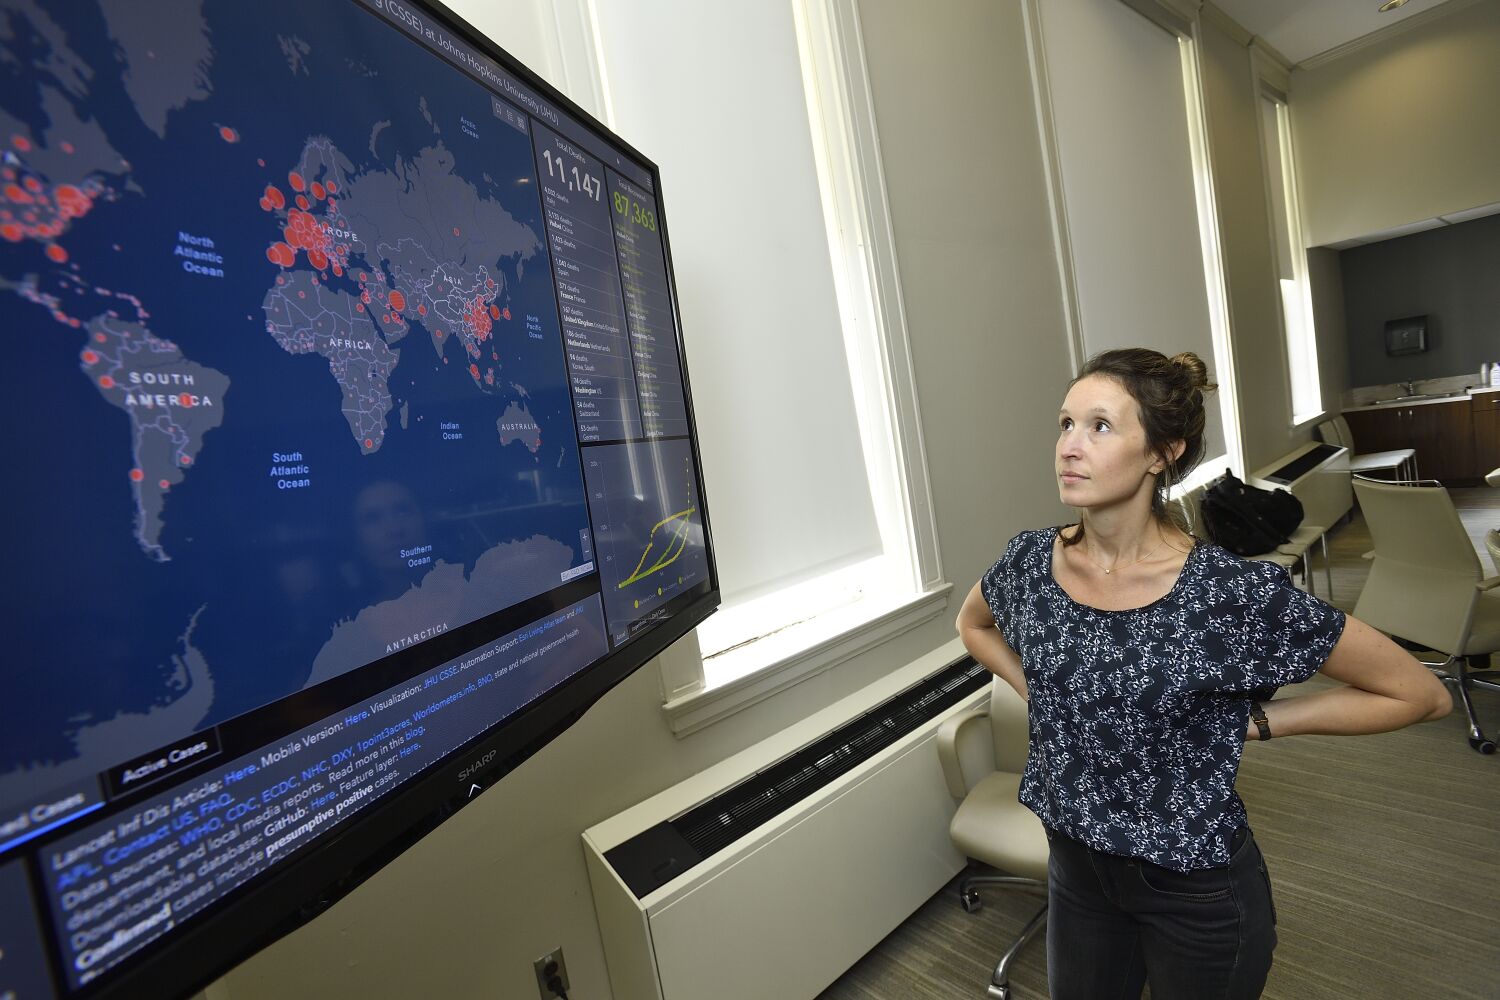 'A new standard': The woman behind the Johns Hopkins COVID dashboard wins major prize